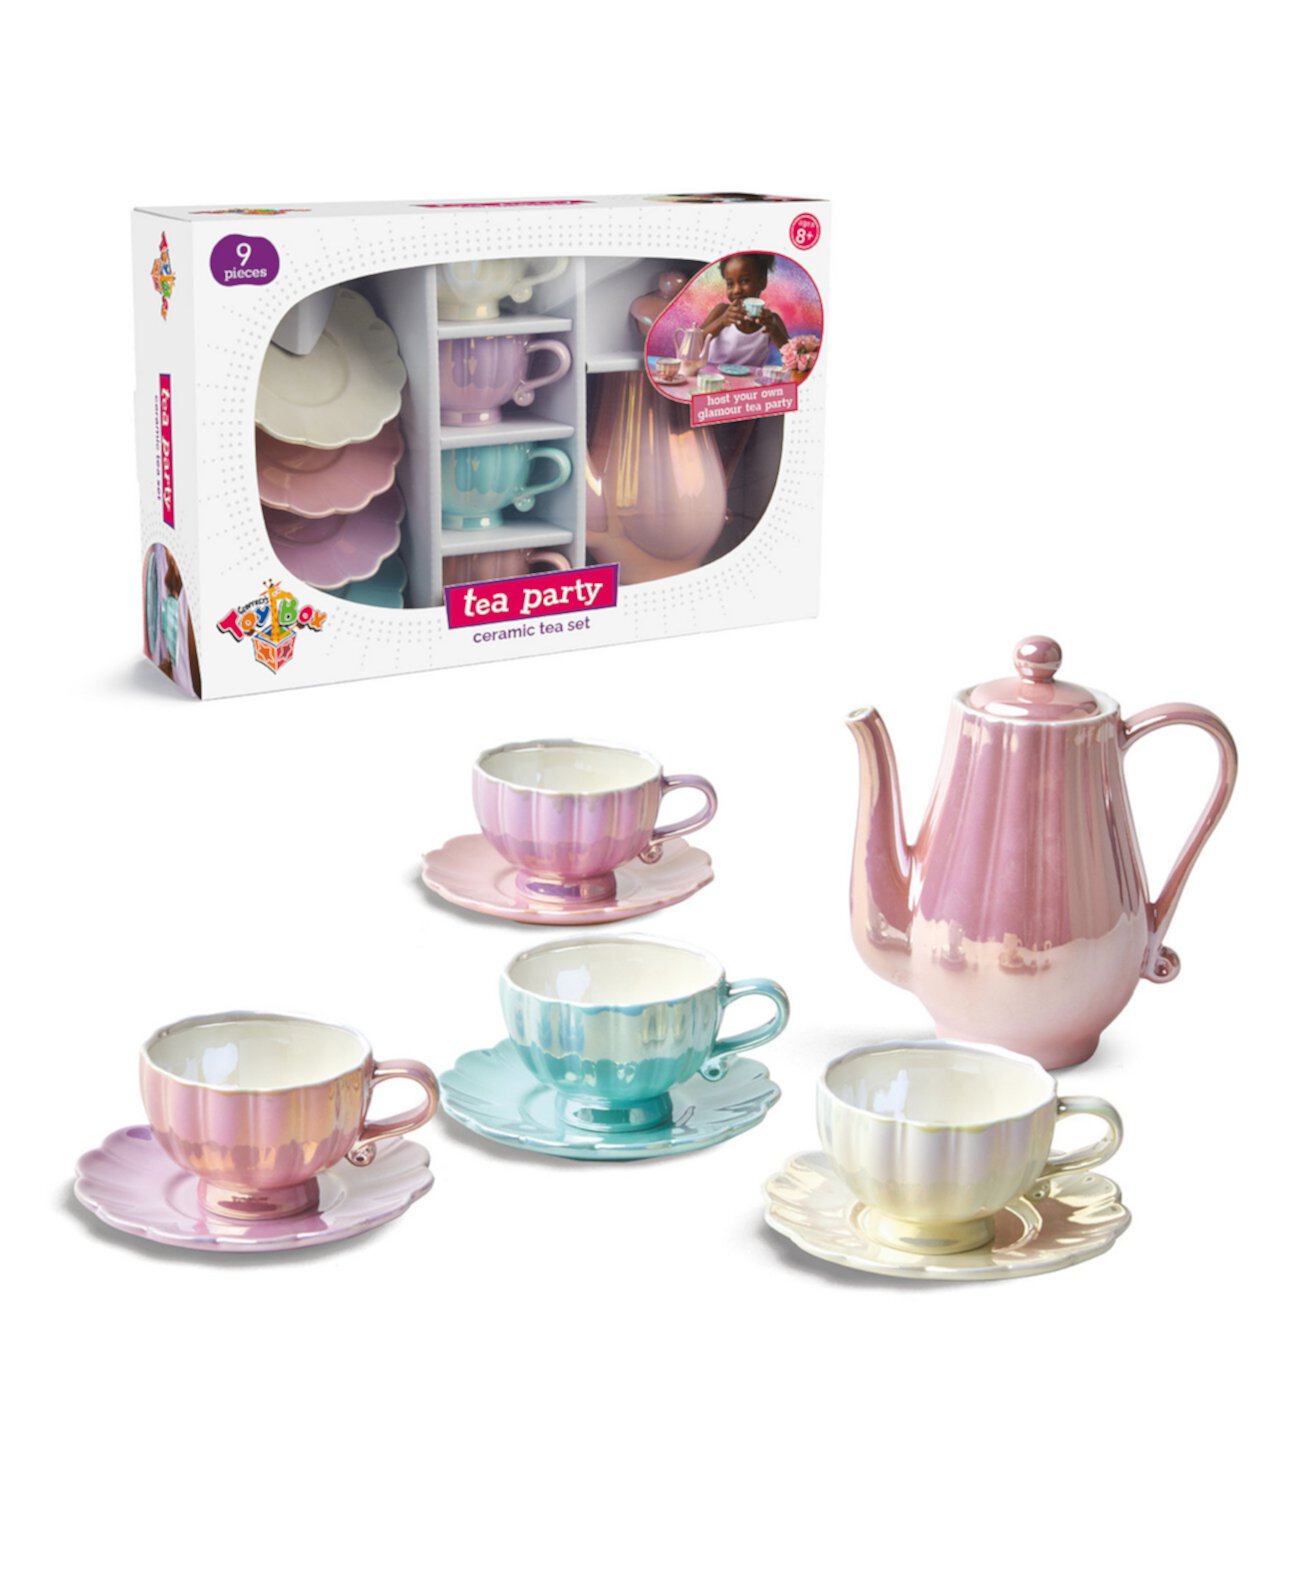 Tea Party Ceramic 9 Pieces Tea Set, Created for Macy's Geoffrey's Toy Box